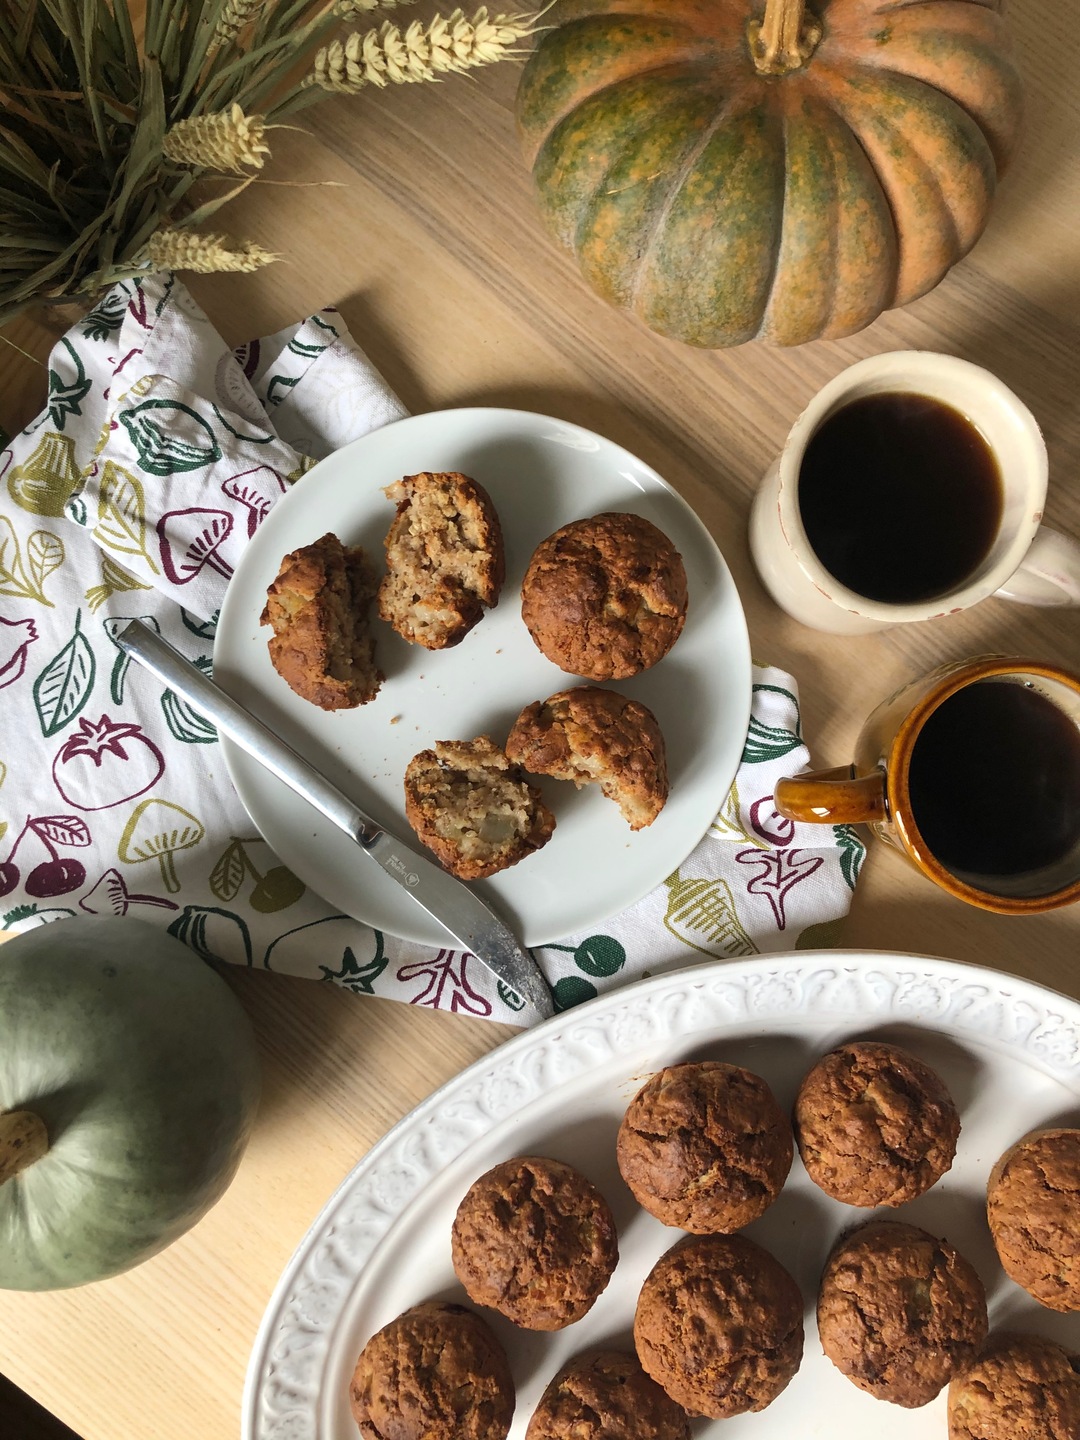 Pear and cardamom muffins with coffee